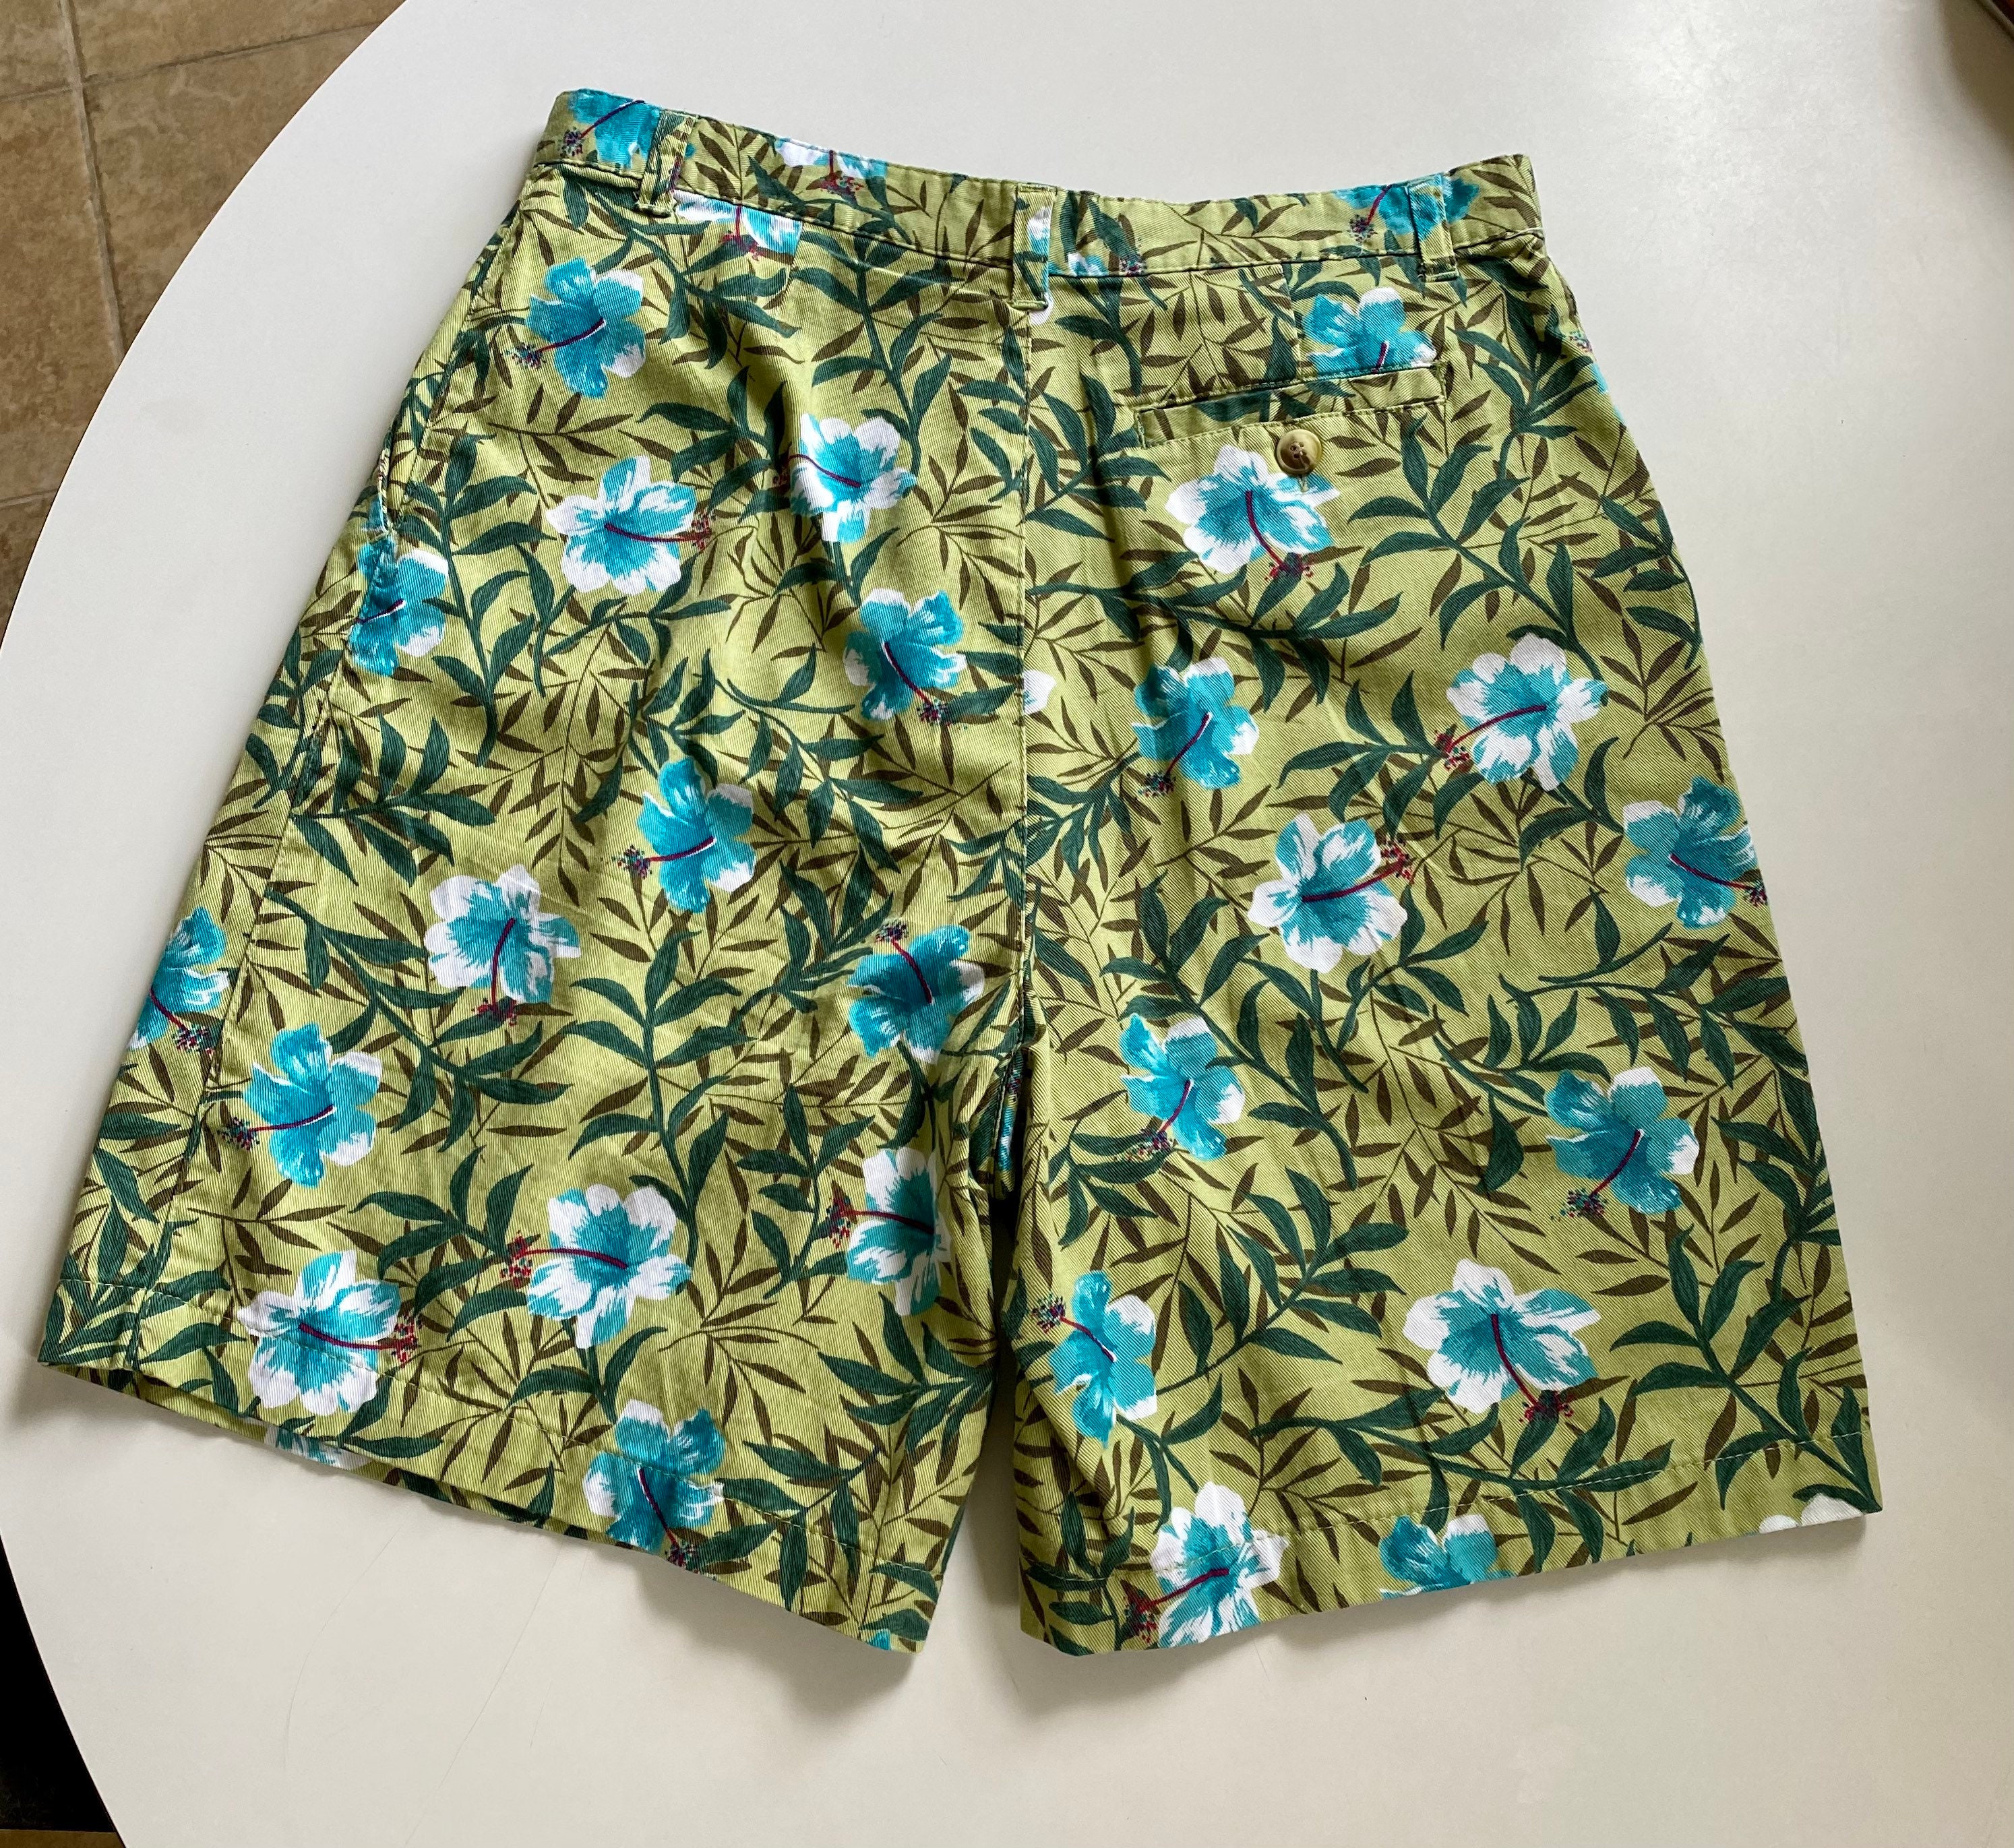 Vintage 1990s Tropical Print High Waisted Bermuda Shorts / Size 6